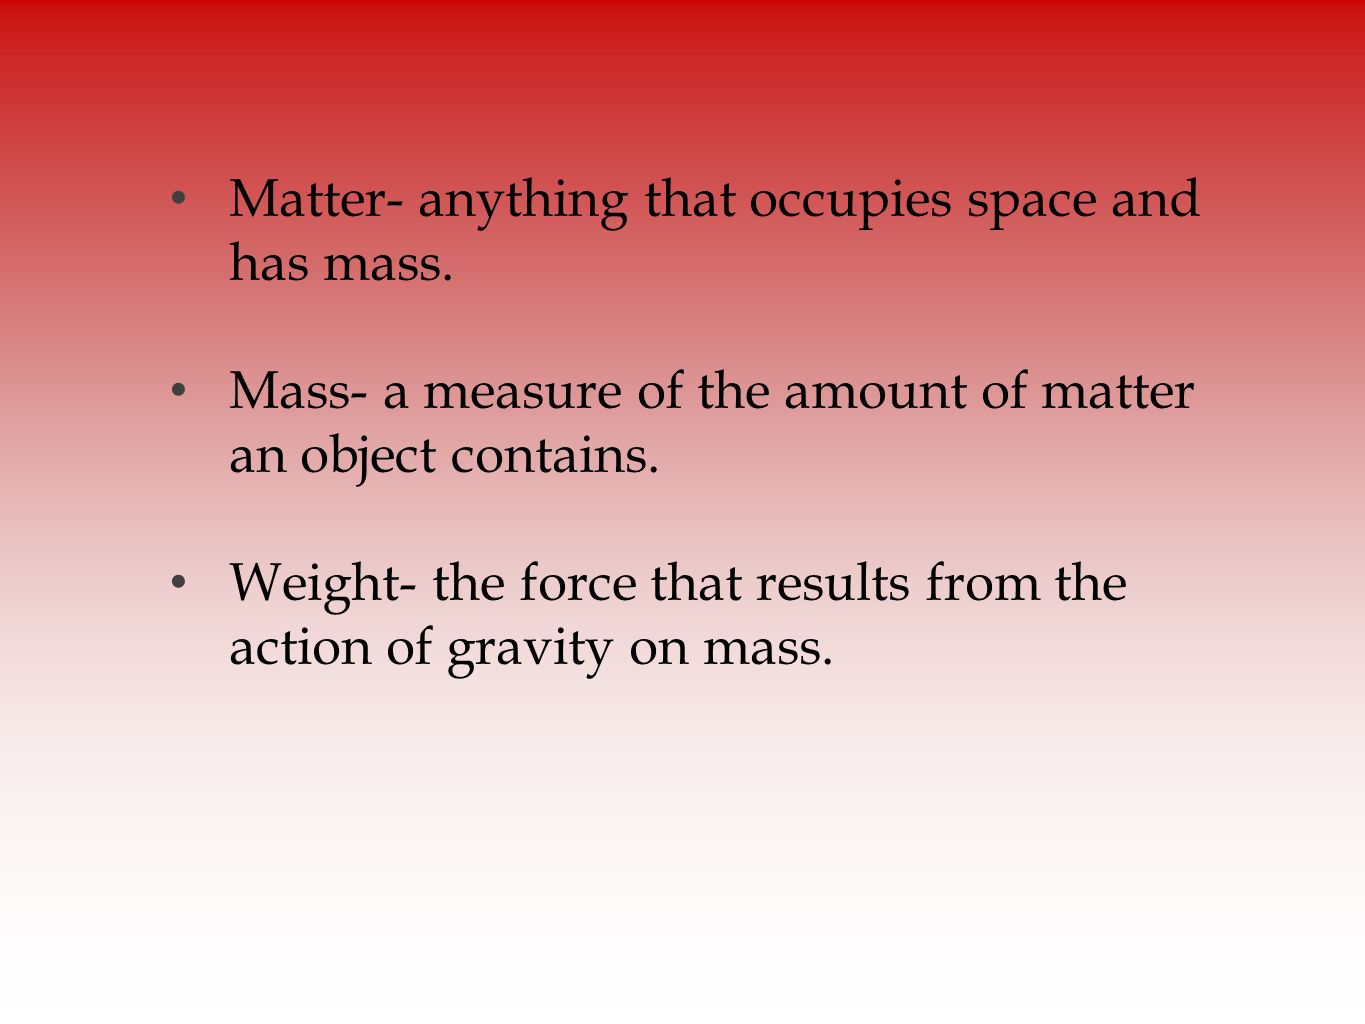 Matter- anything that occupies space and has mass.